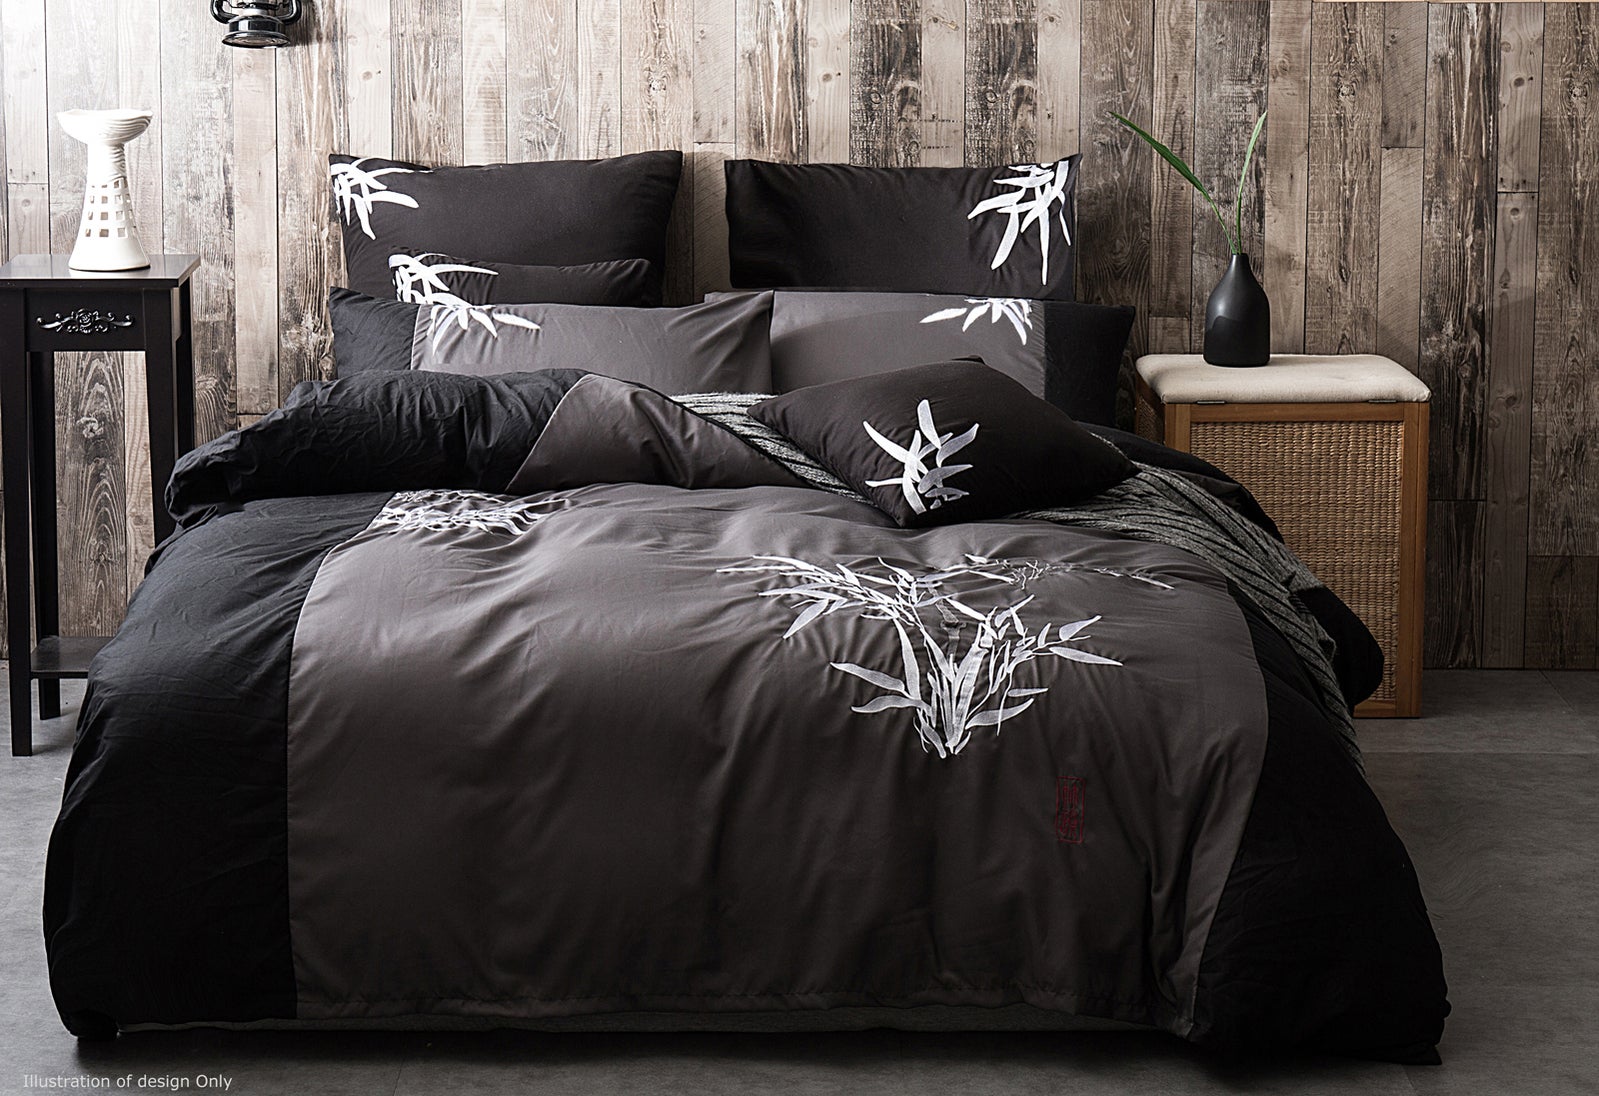 Embroidery Bamboo Black and Grey 3pcs Quilt Cover Set (Queen / King / Super King Options)